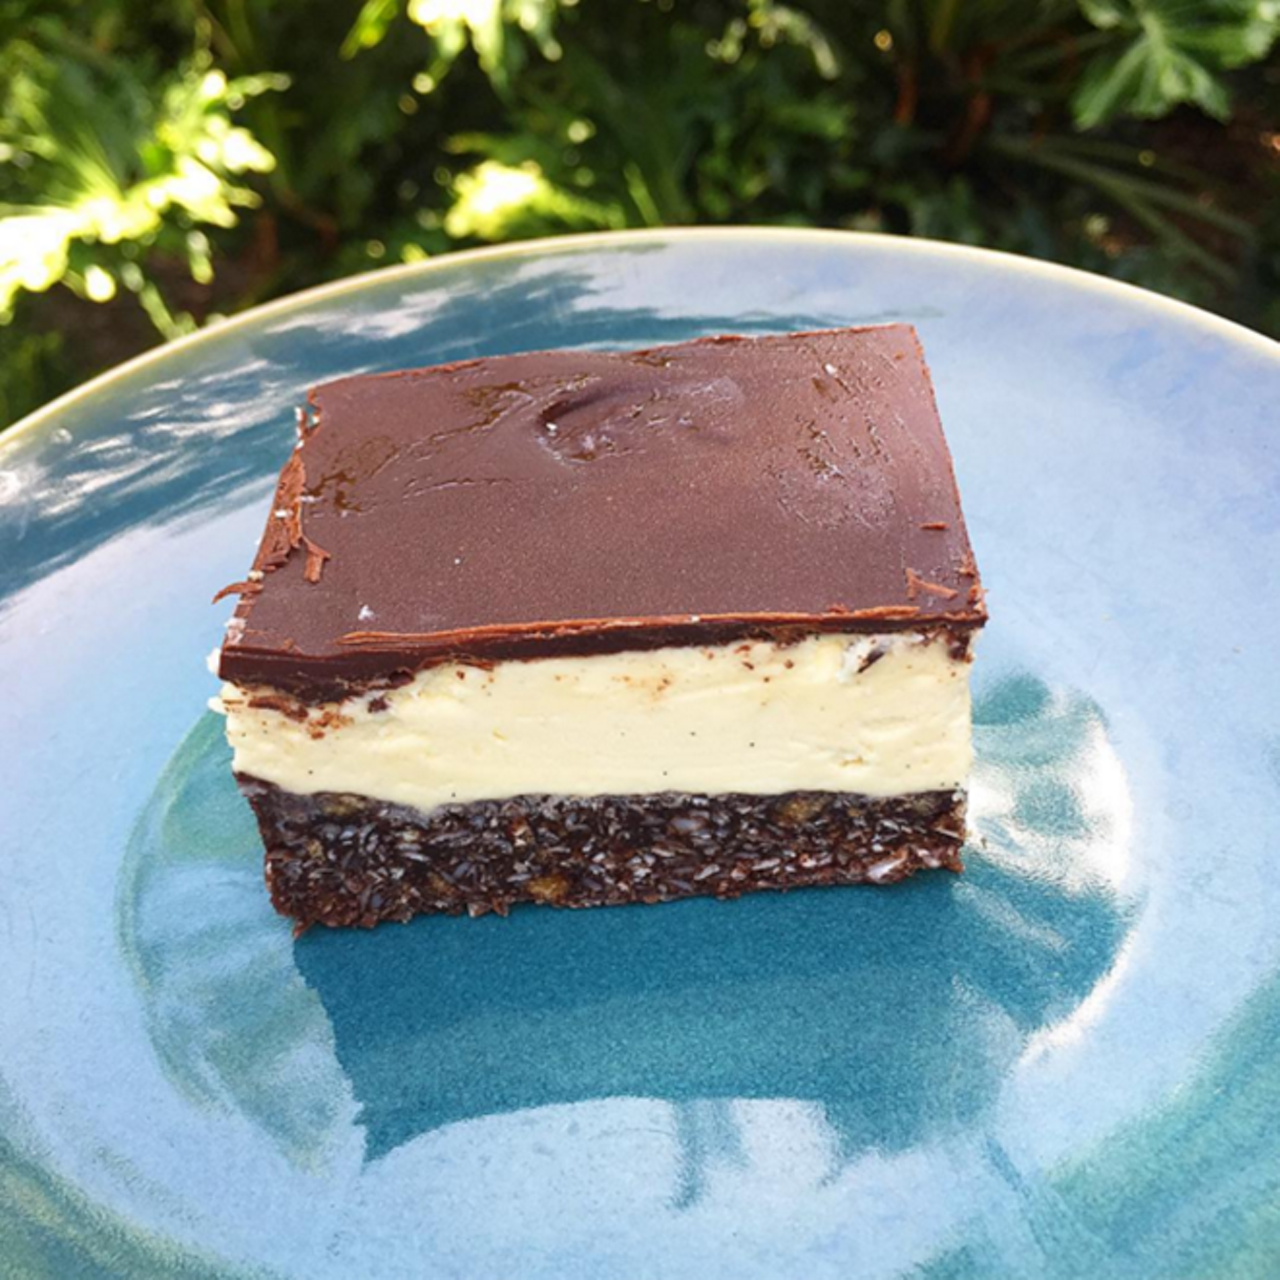 Nanaimo bar at Valhalla Bakery
2603 E. South St., 407-505-9661, valhallabakery.com
The Canadian specialty, usually layered with custard or buttercream, is convincingly veganized at Valhalla. Chef Celine Duvoisin (see also the pulled jackfruit BBQ sandwich, Market on South) is some kind of magical unicorn kitchen witch.
Photo via Instagram user valhallabakery